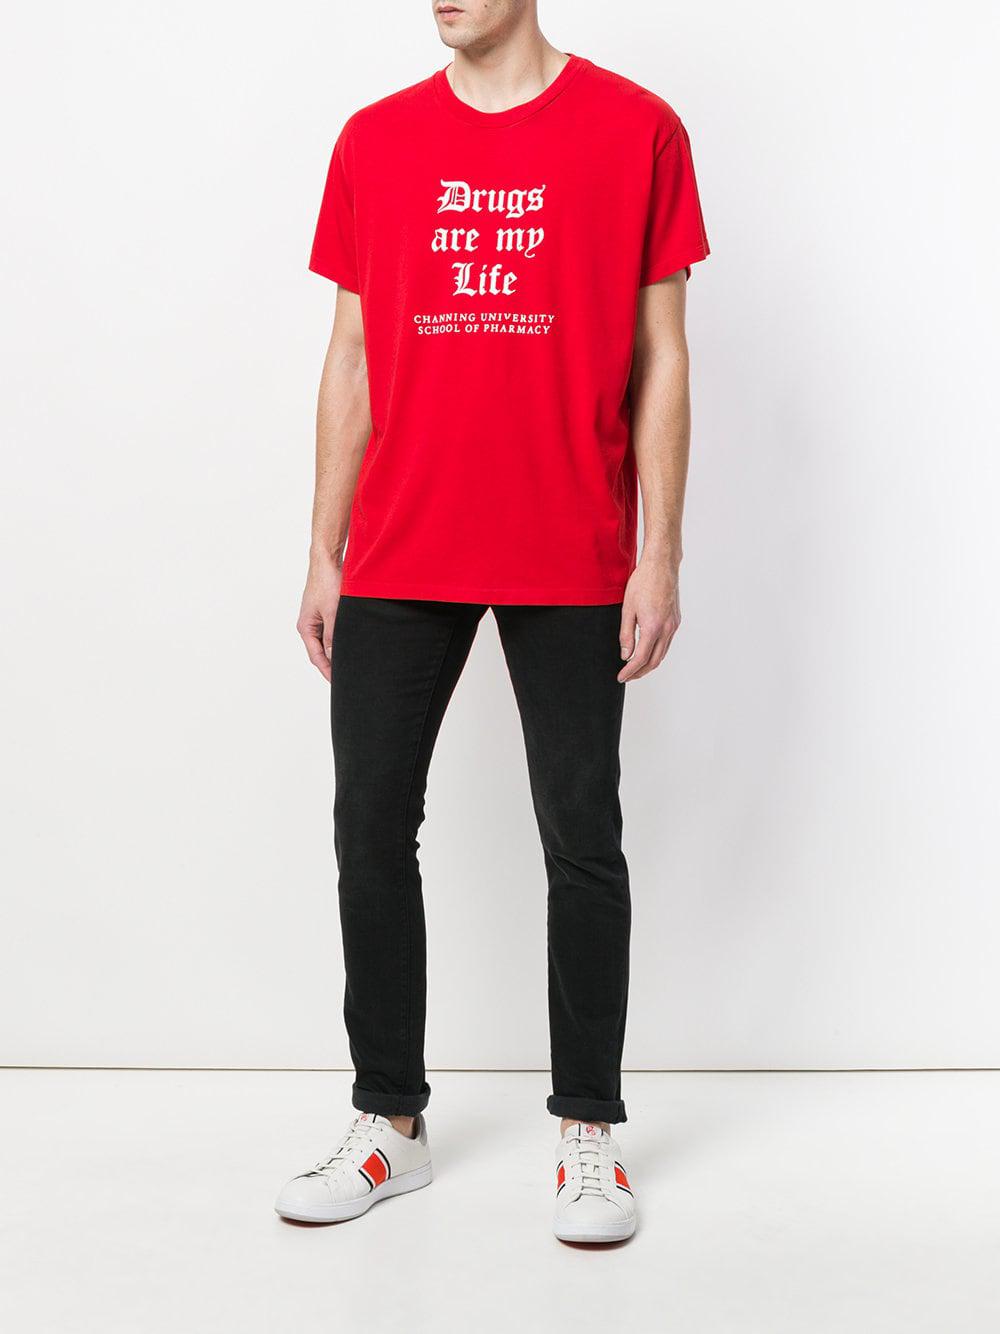 Amiri Drugs Are My Life T-shirt in Red for Men - Lyst